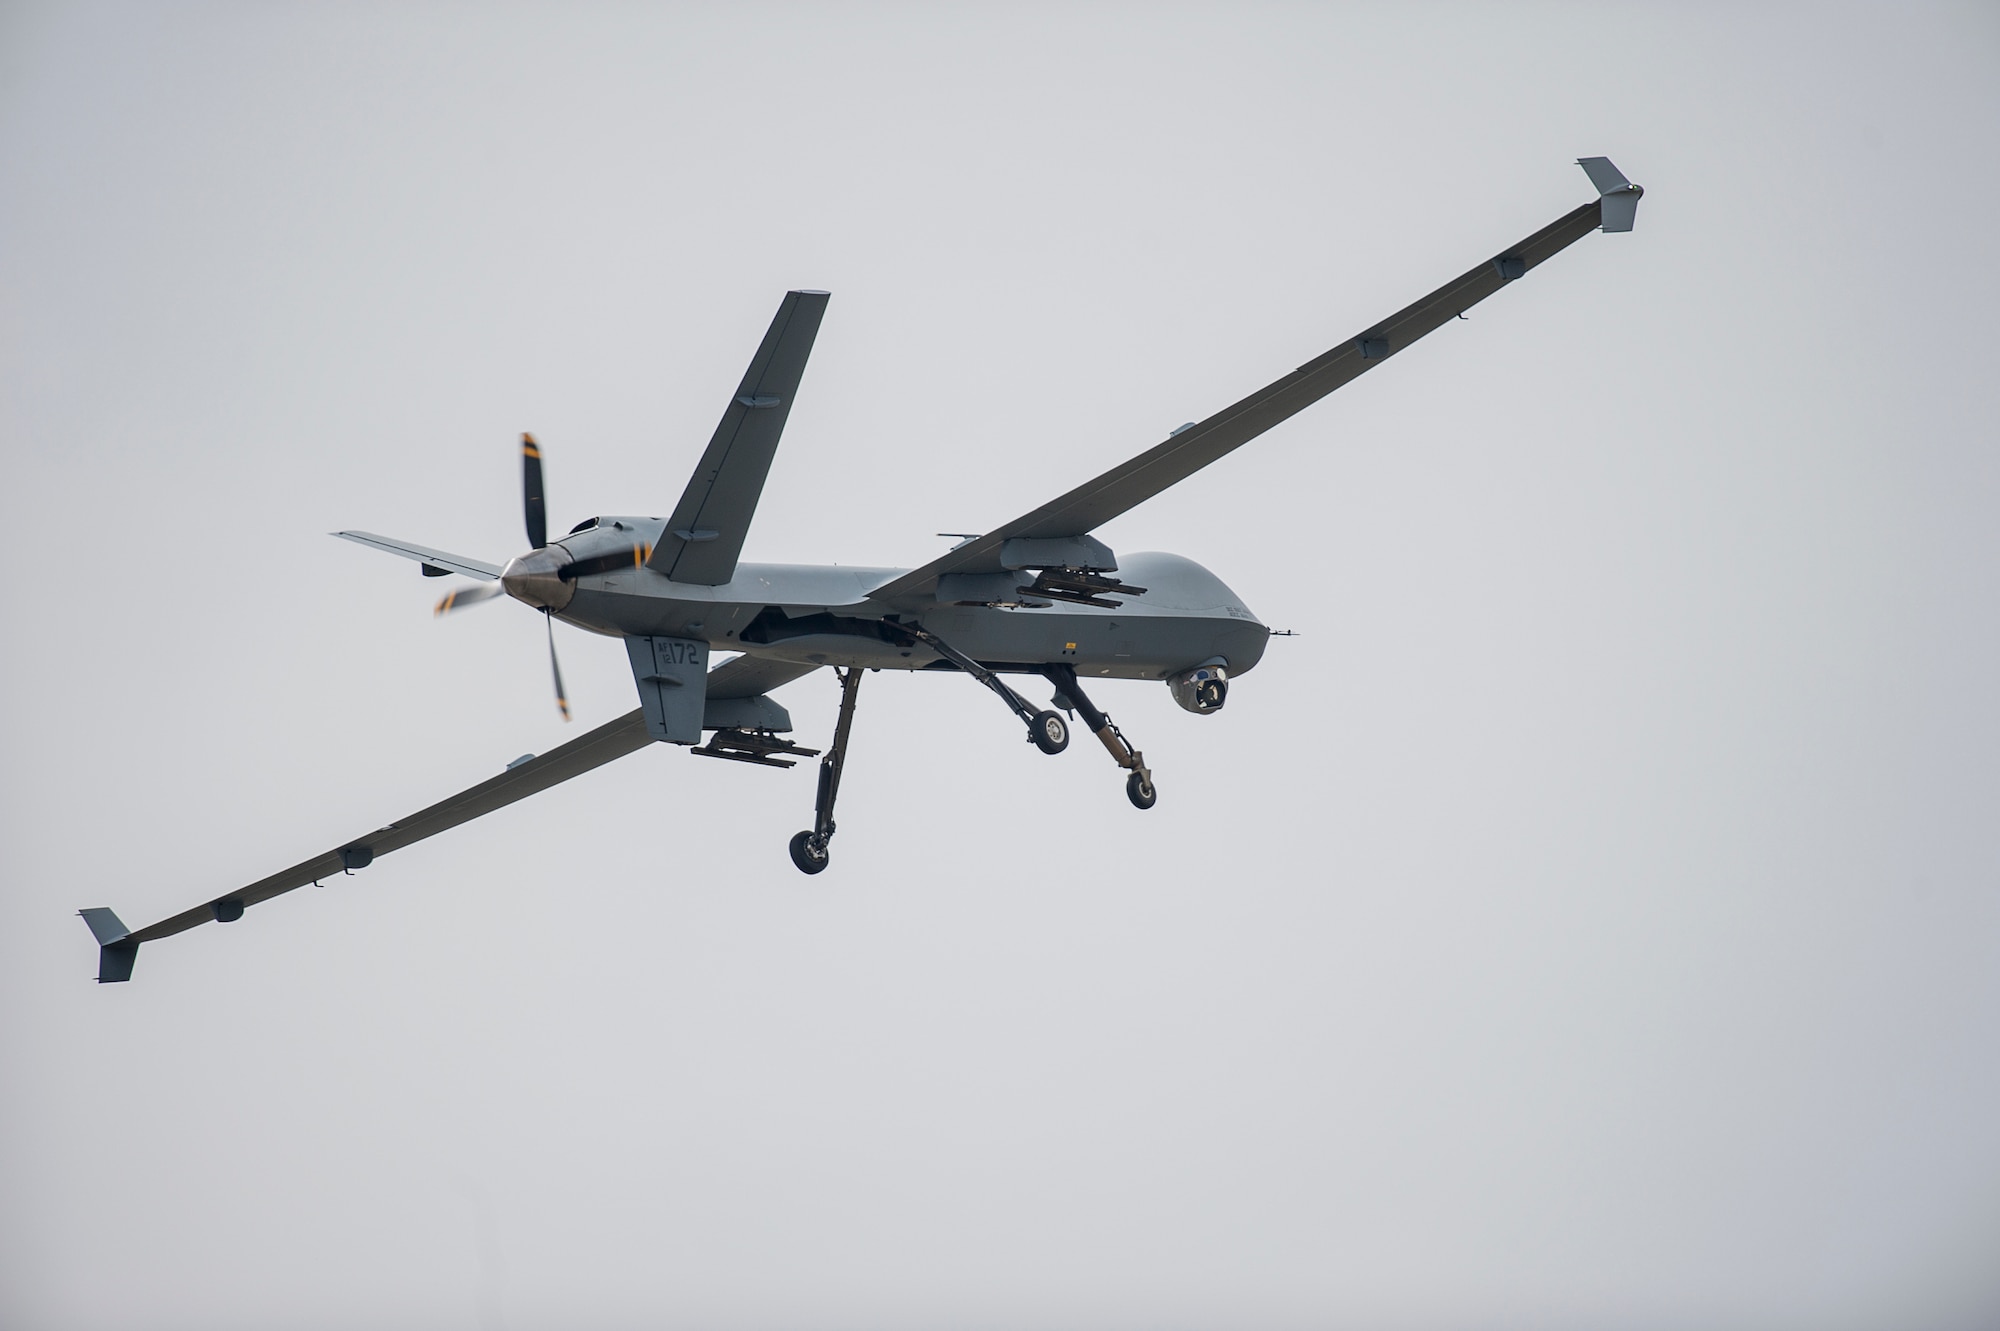 An MQ-9 Reaper performs a low pass during a first-ever air show demonstration May 29, 2016, at Cannon Air Force Base, N.M. The 2016 Cannon Air Show highlights the unique capabilities and qualities of Cannon's Air Commandos and also celebrates the long-standing relationship between the 27th Special Operations Wing and the High Plains community.  (U.S. Air Force photo/Master Sgt. Dennis J. Henry Jr.)